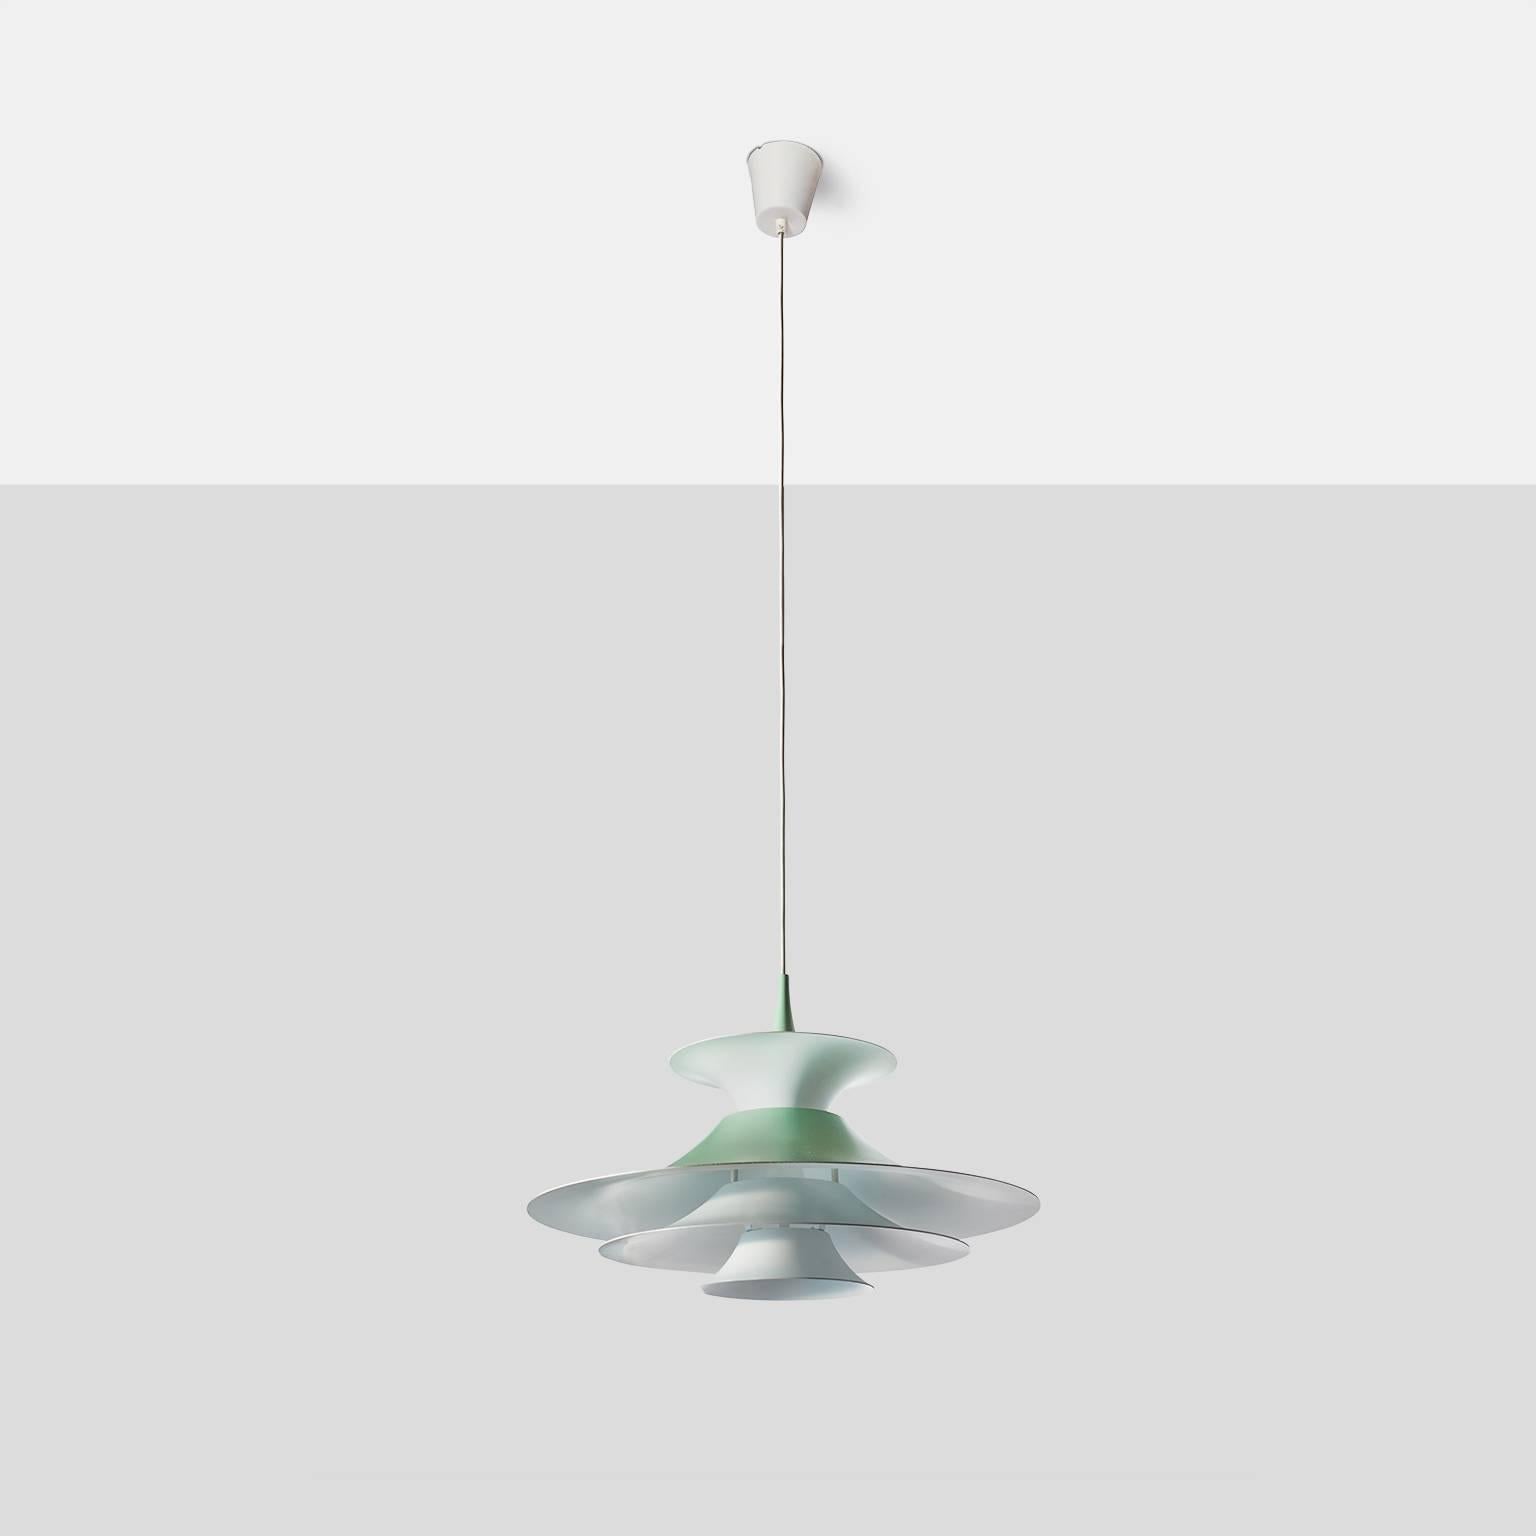 A pendant lamp designed by Eric Balslev and produced by Fog & Mørup in Denmark, circa 1970, made of enameled aluminum. Painted in ivory and celery.
Denmark, circa 1970
Eric Balslev for Fog & Mørup.
 